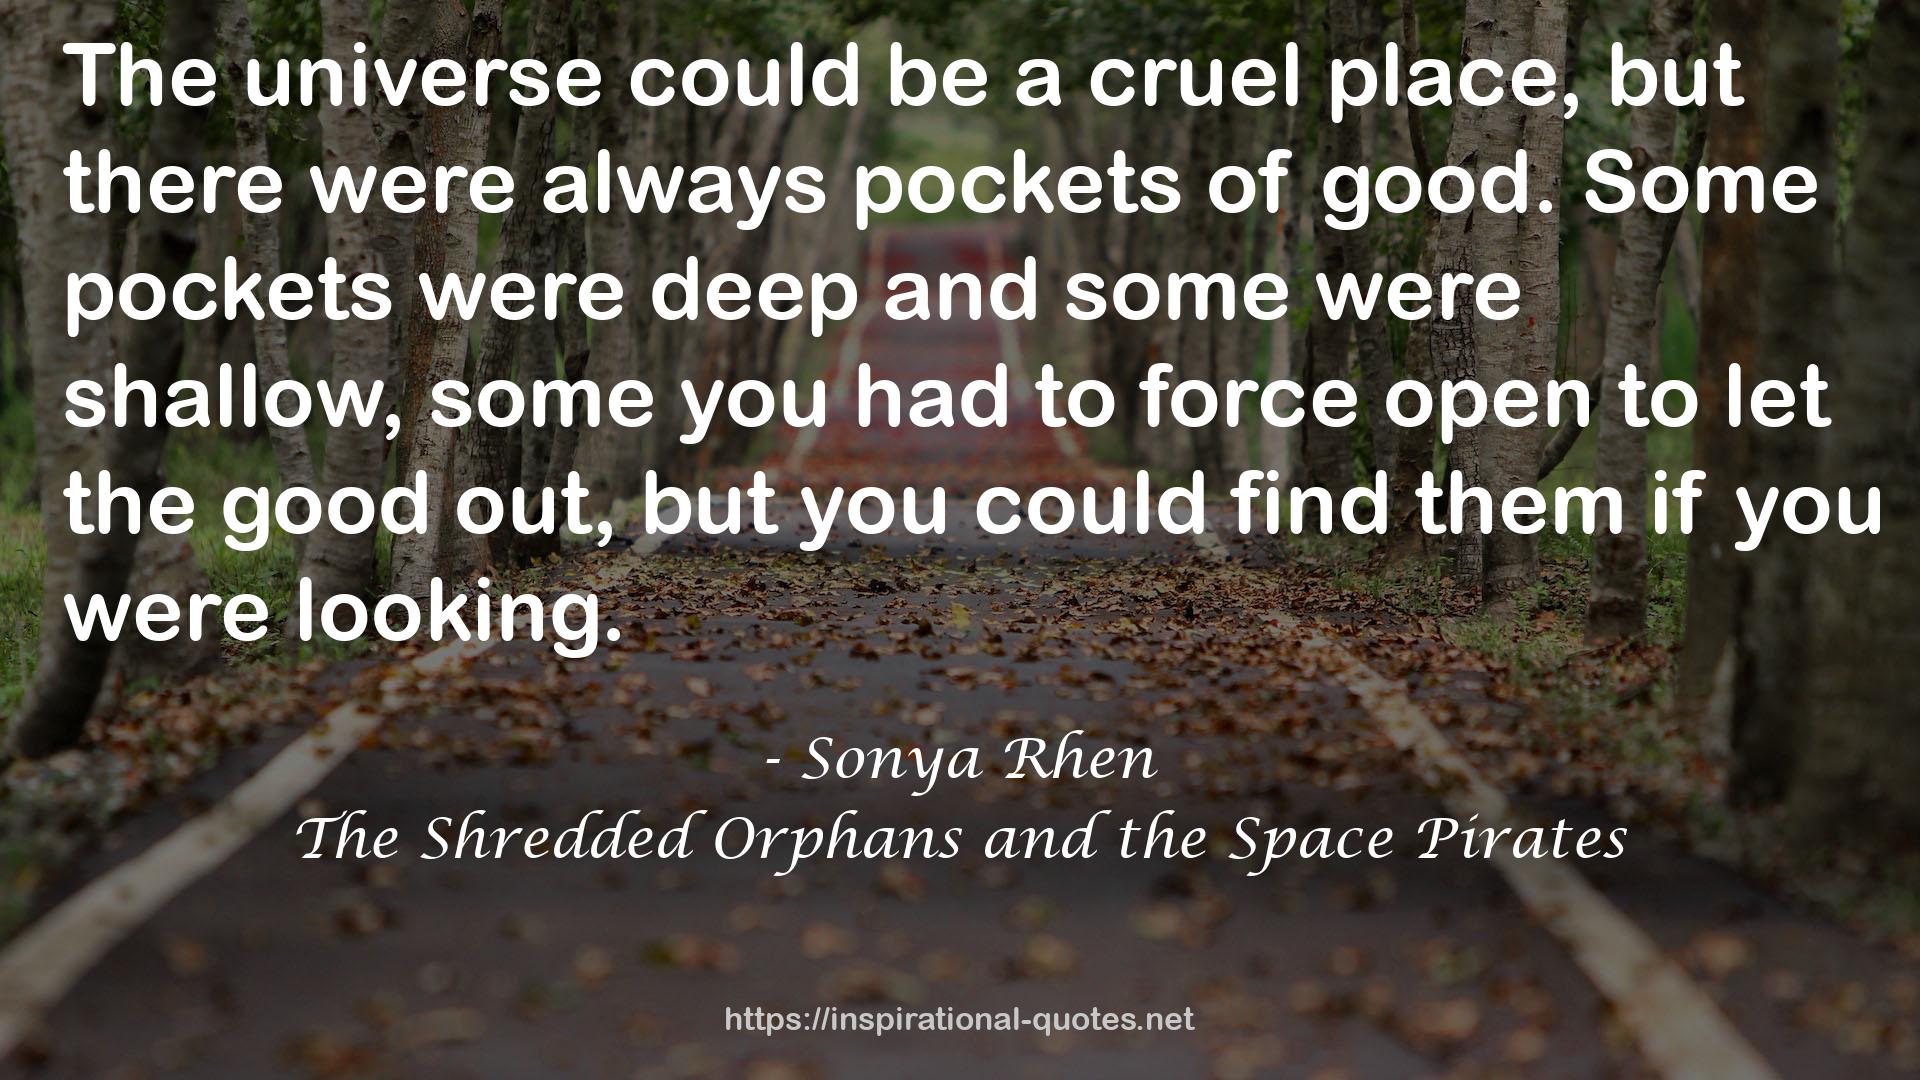 The Shredded Orphans and the Space Pirates QUOTES